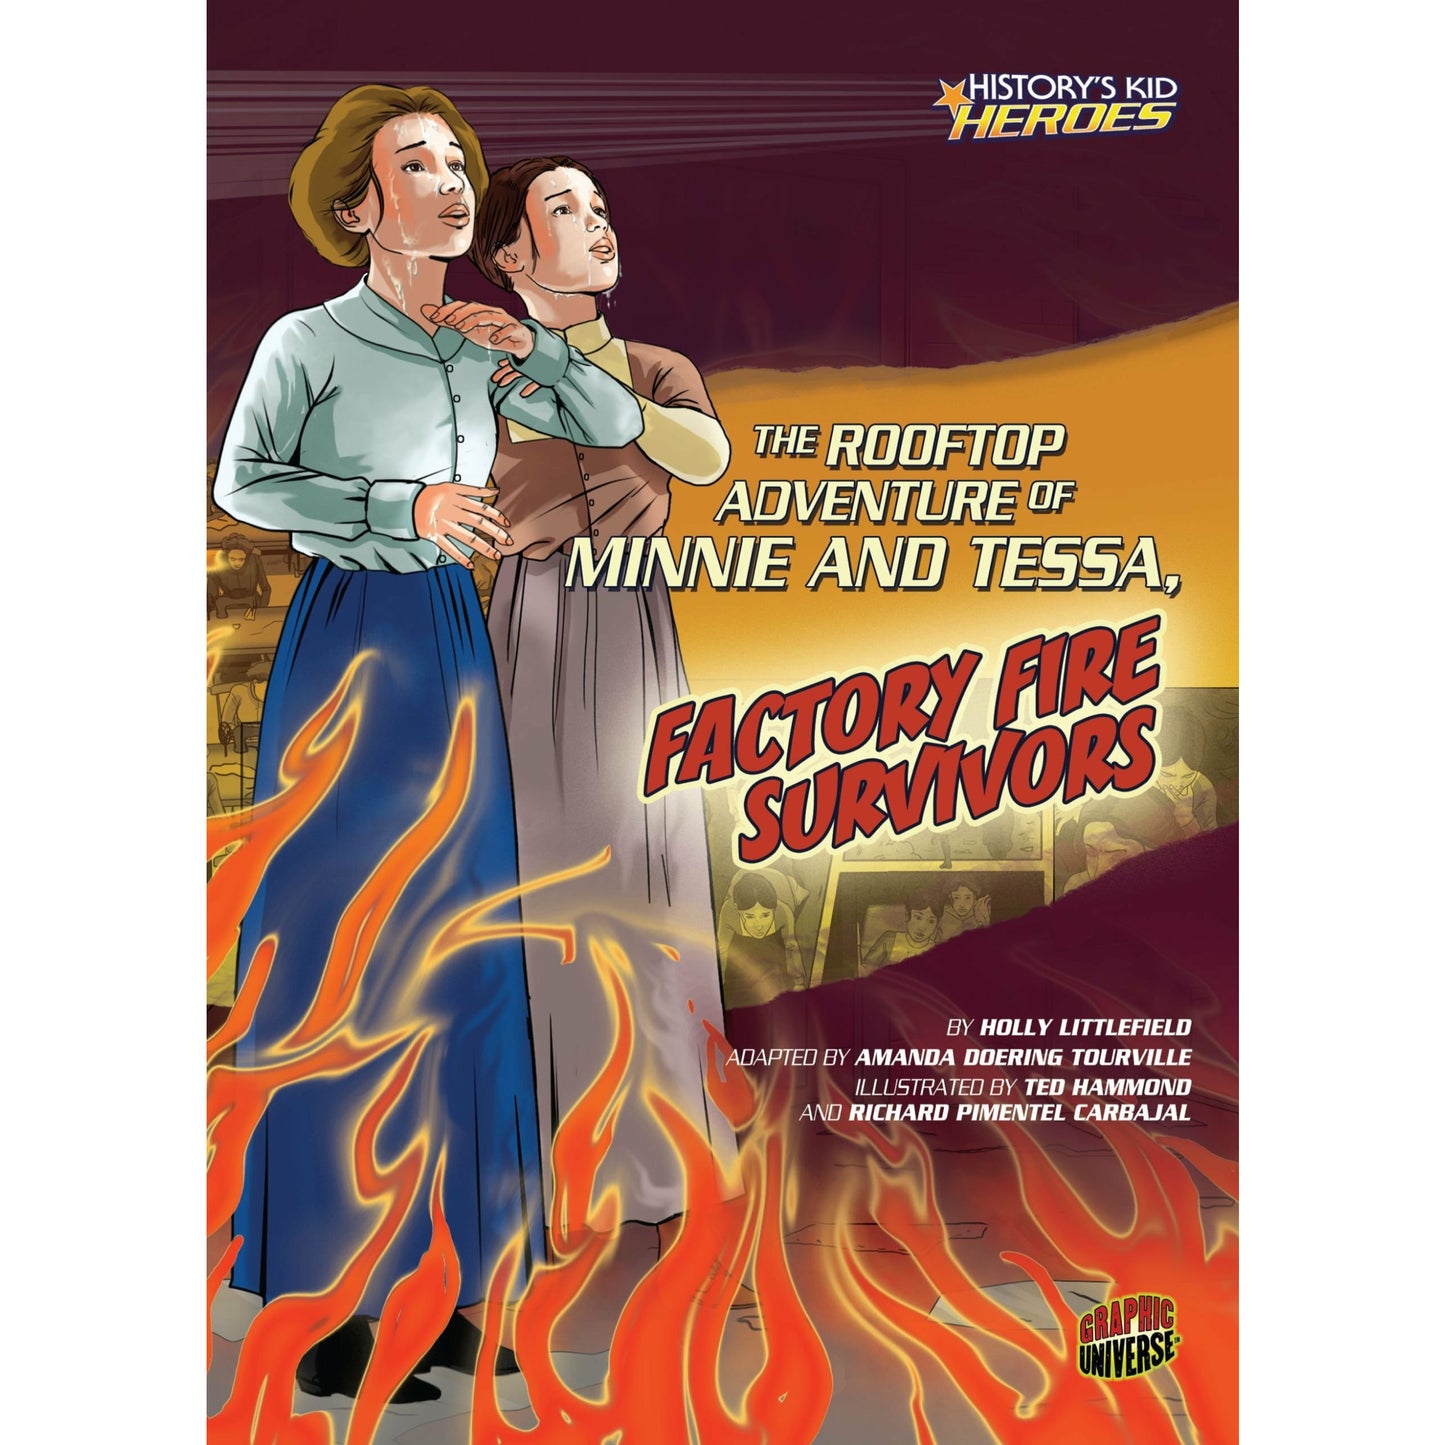 The Rooftop Adventure of Minnie and Tessa, Factory Fire Survivors